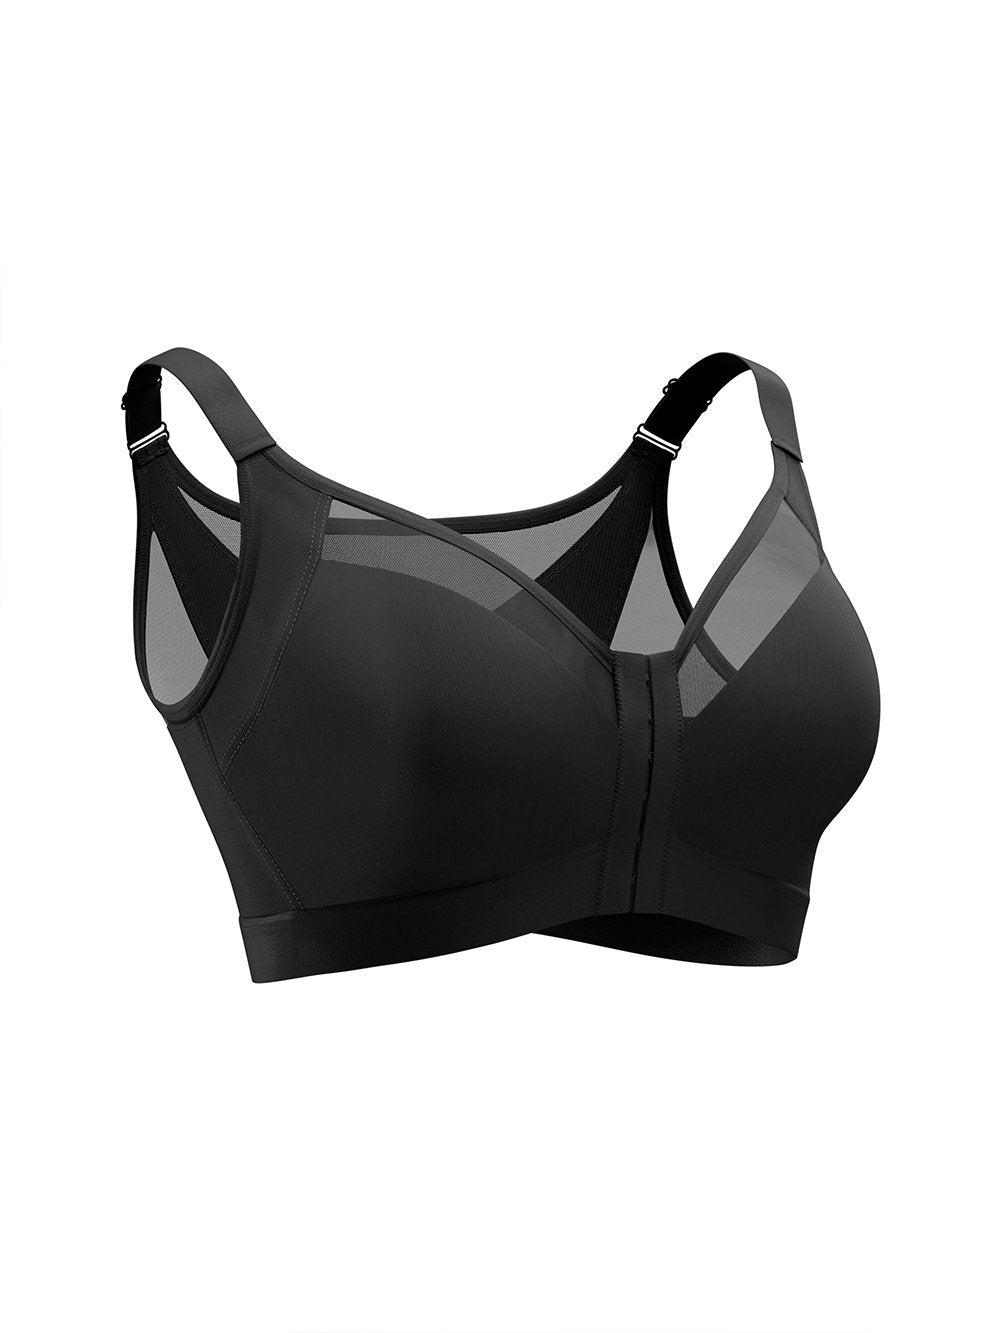 Comfort Posture Corrector Bra with Contour Cups Bra-EARLY BLACK FRIDAY SALE-BLACK (3-PACK BRAS ONLY $19.99)